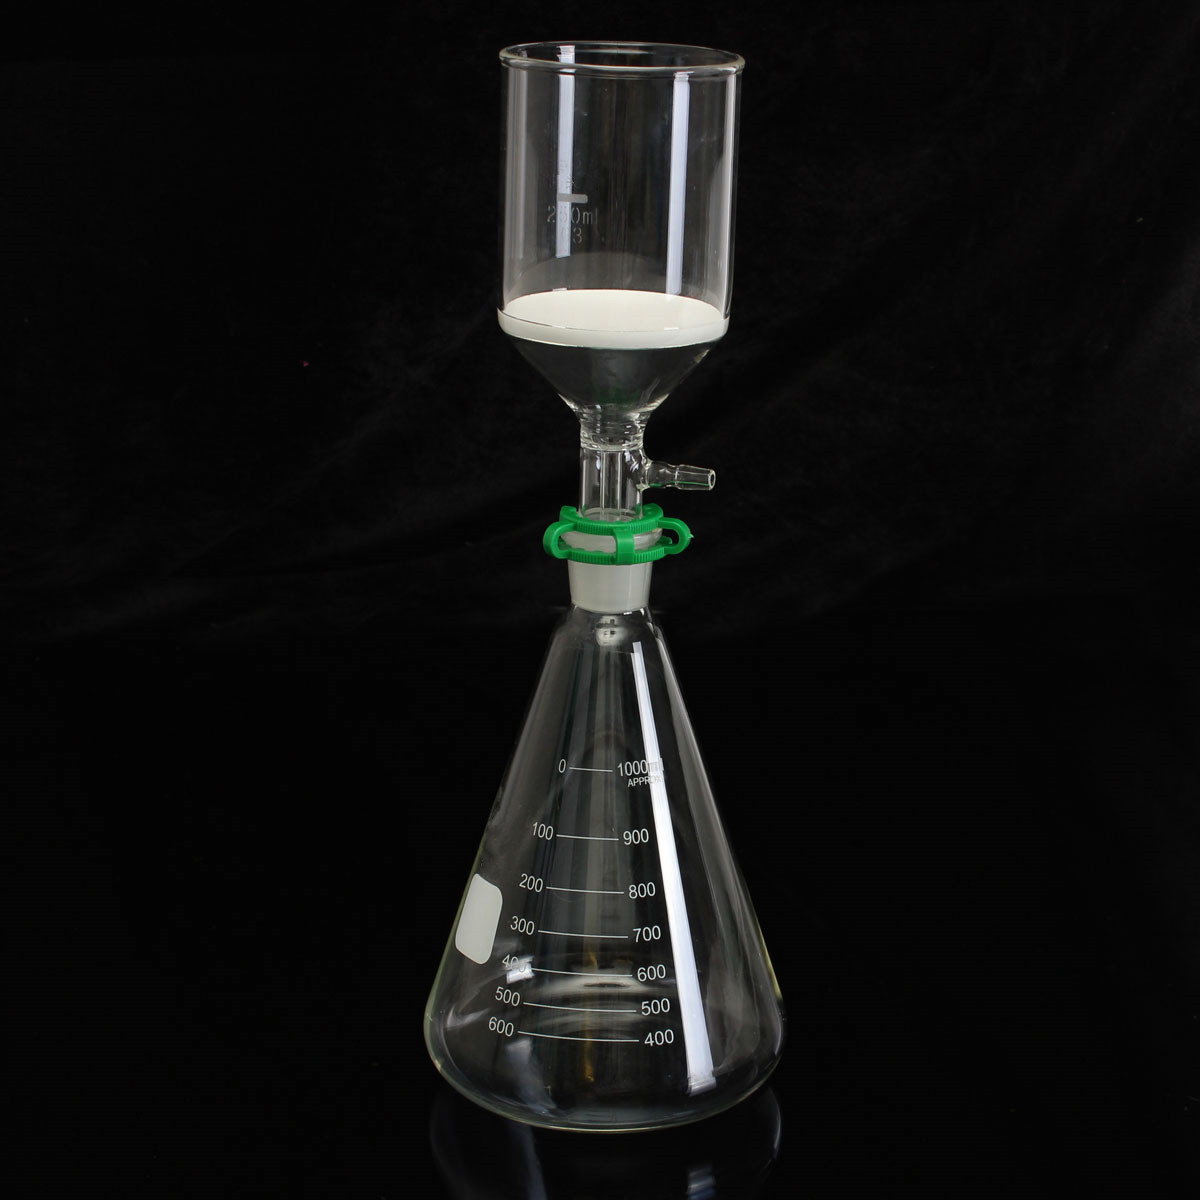 Glass-Vaccum-Suction-Filter-Filtration-Kit-250ml-Buchner-Funnel-1000mL-Conical-Flask-992081-1